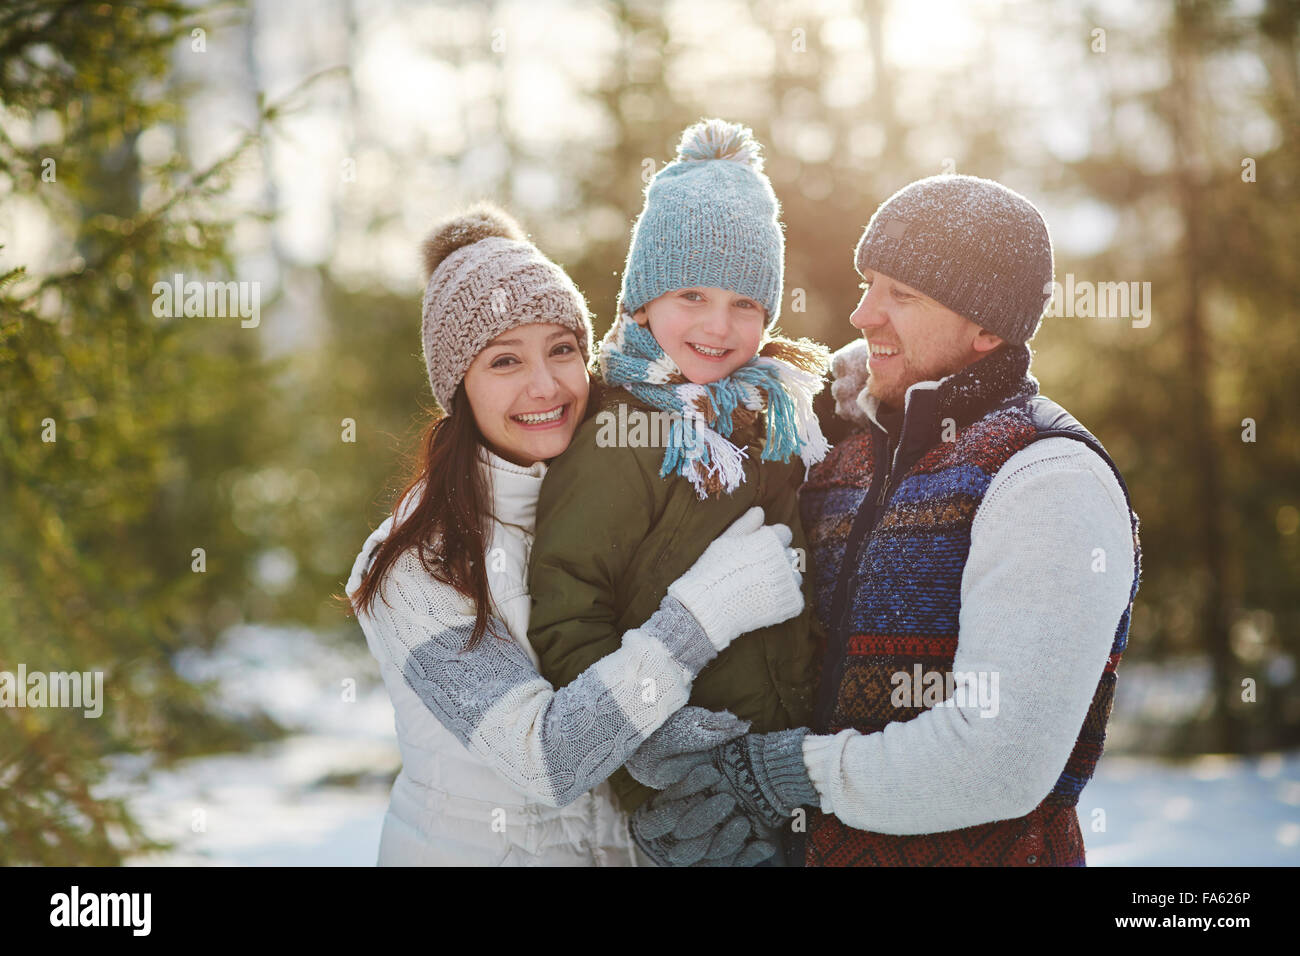 Happy family spending weekend in winter park Stock Photo